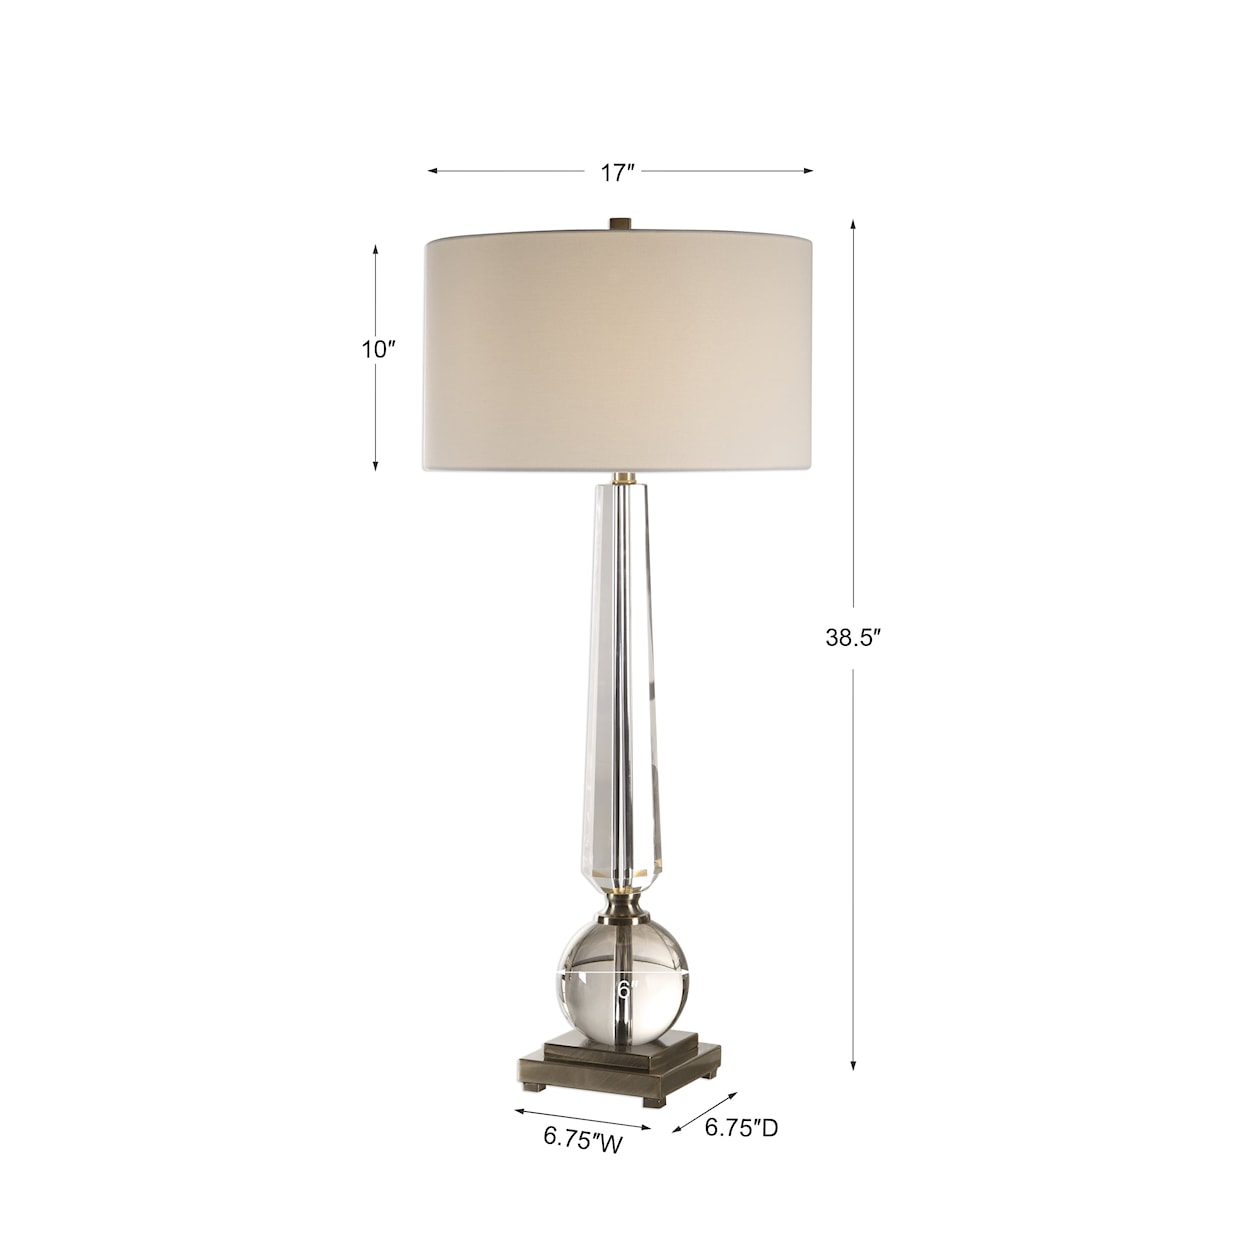 Uttermost Table Lamps Crista Crystal Lamp